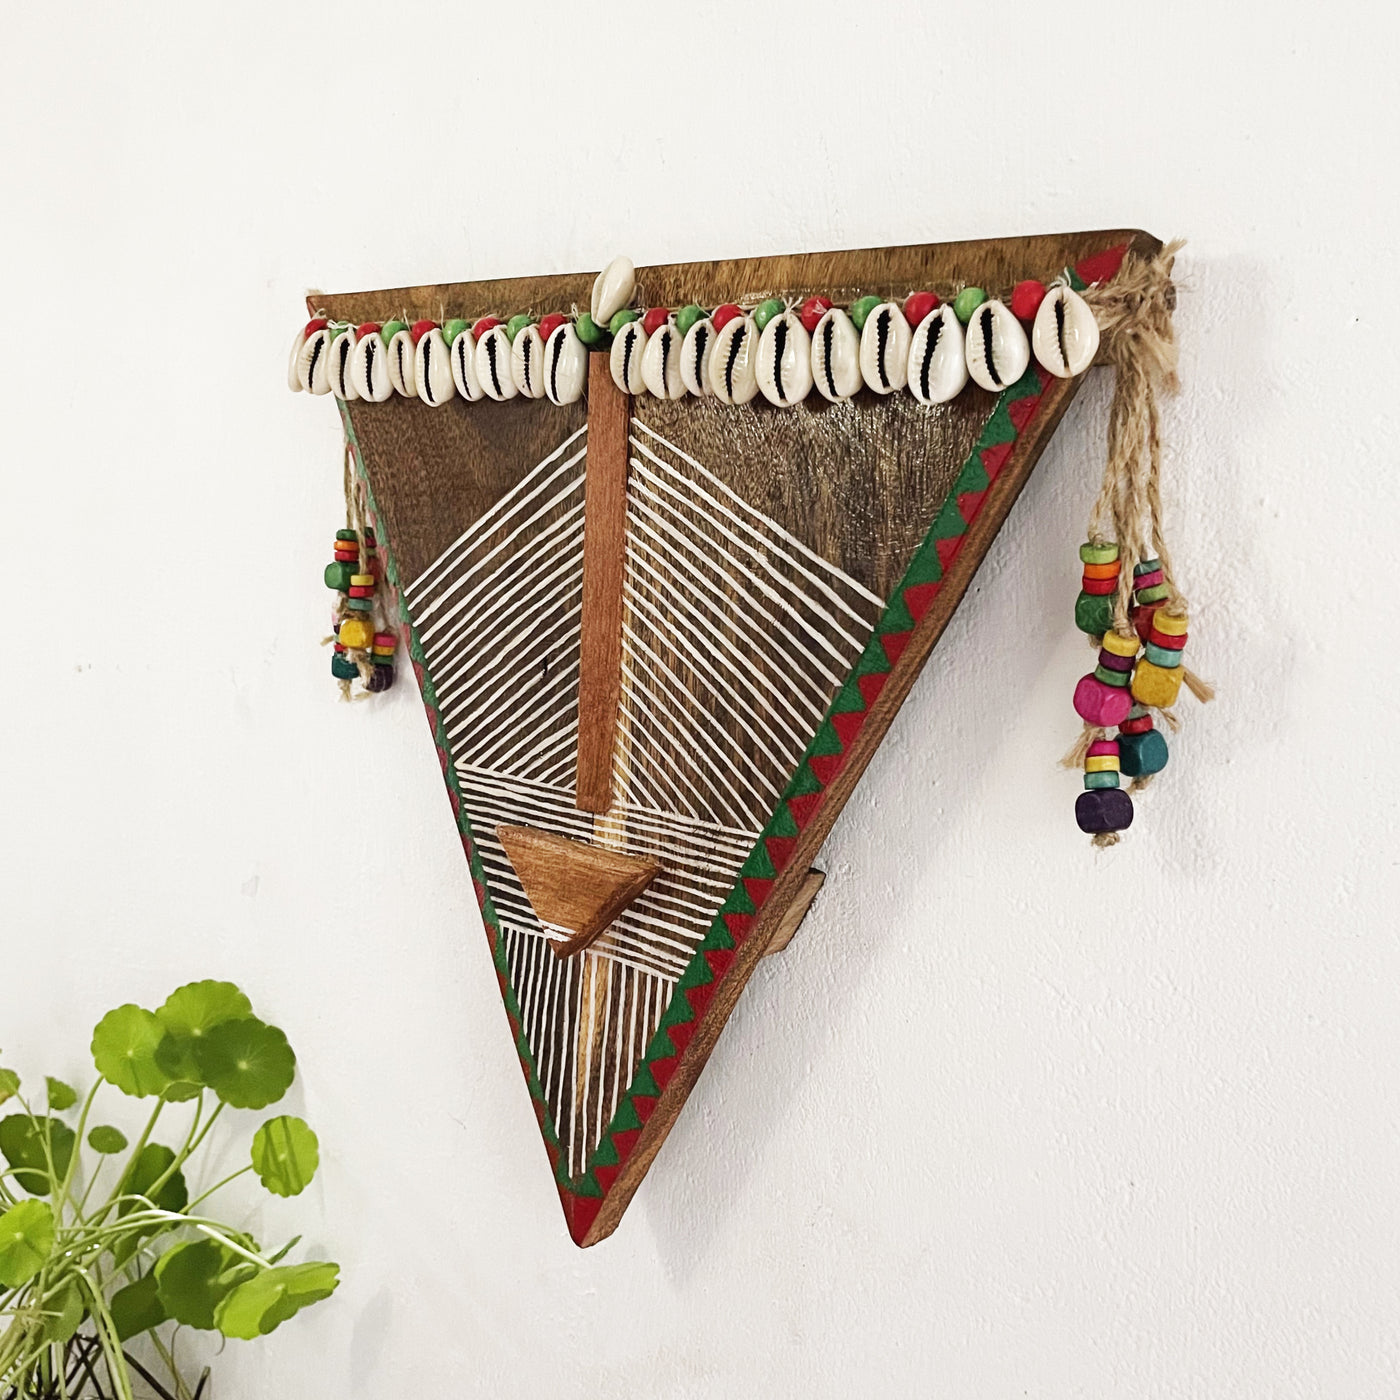 Wooden tribal triangle hand painted mask